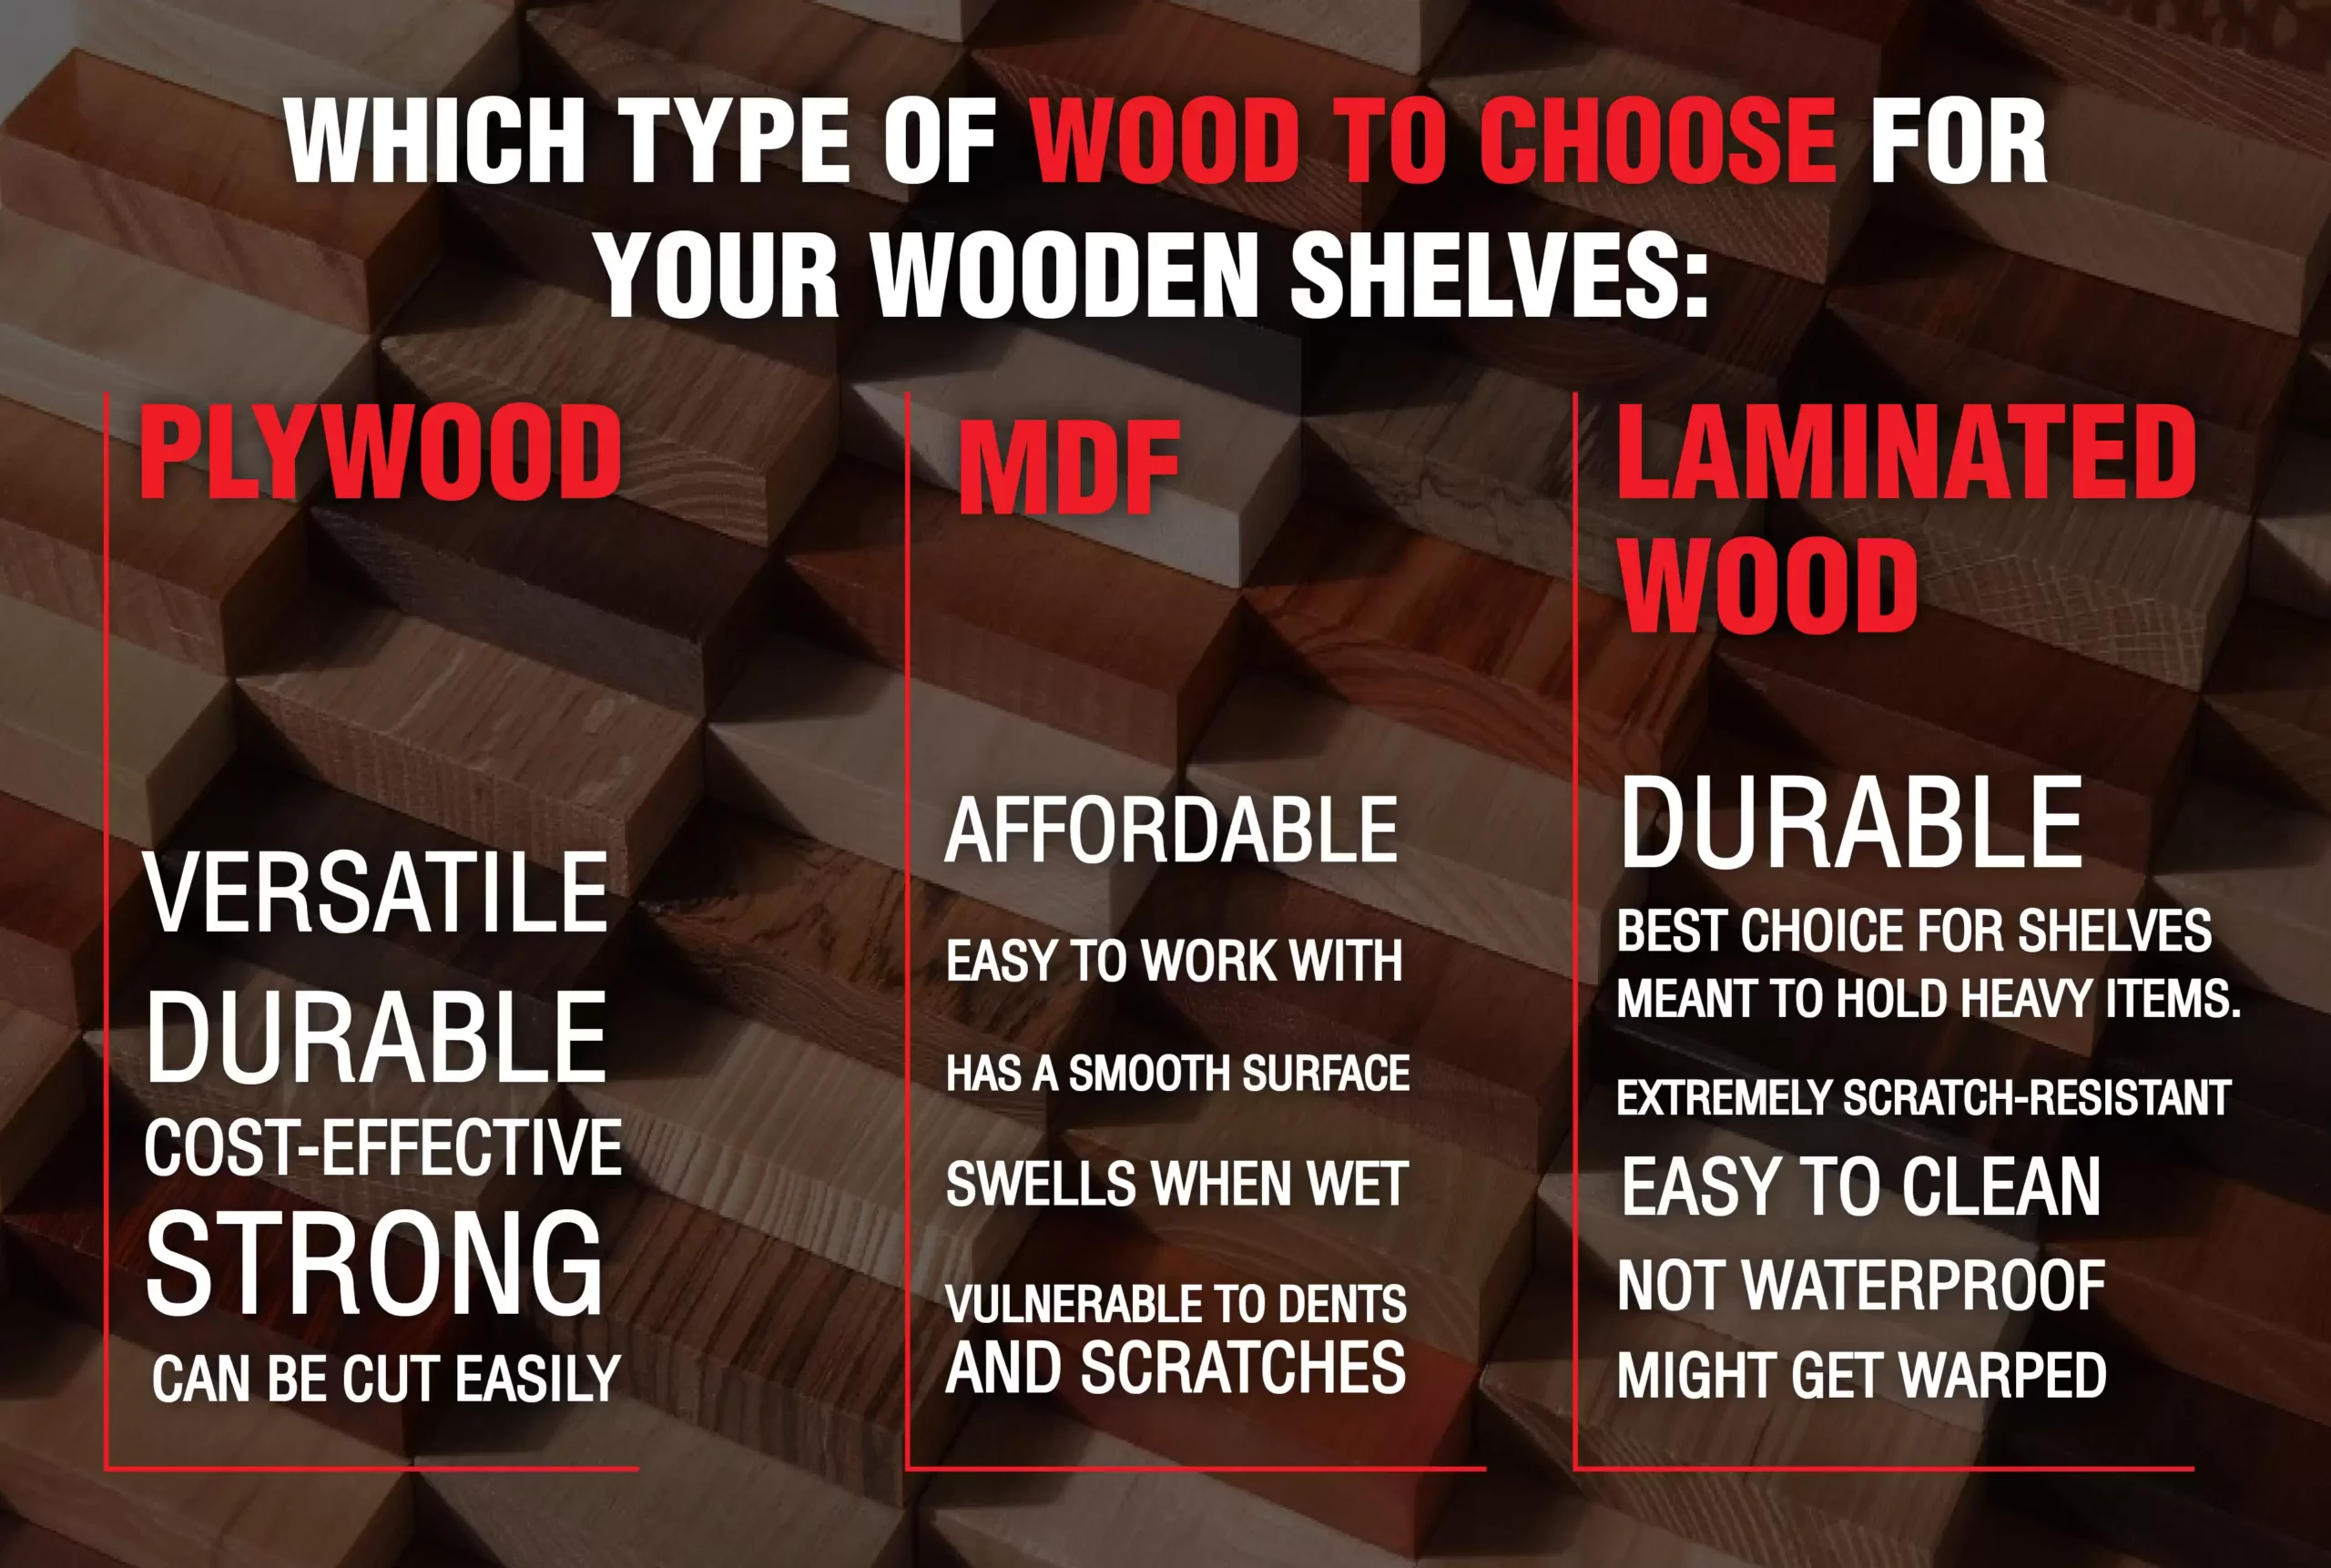 An infographic about the features of plywood, MDF and laminated wood